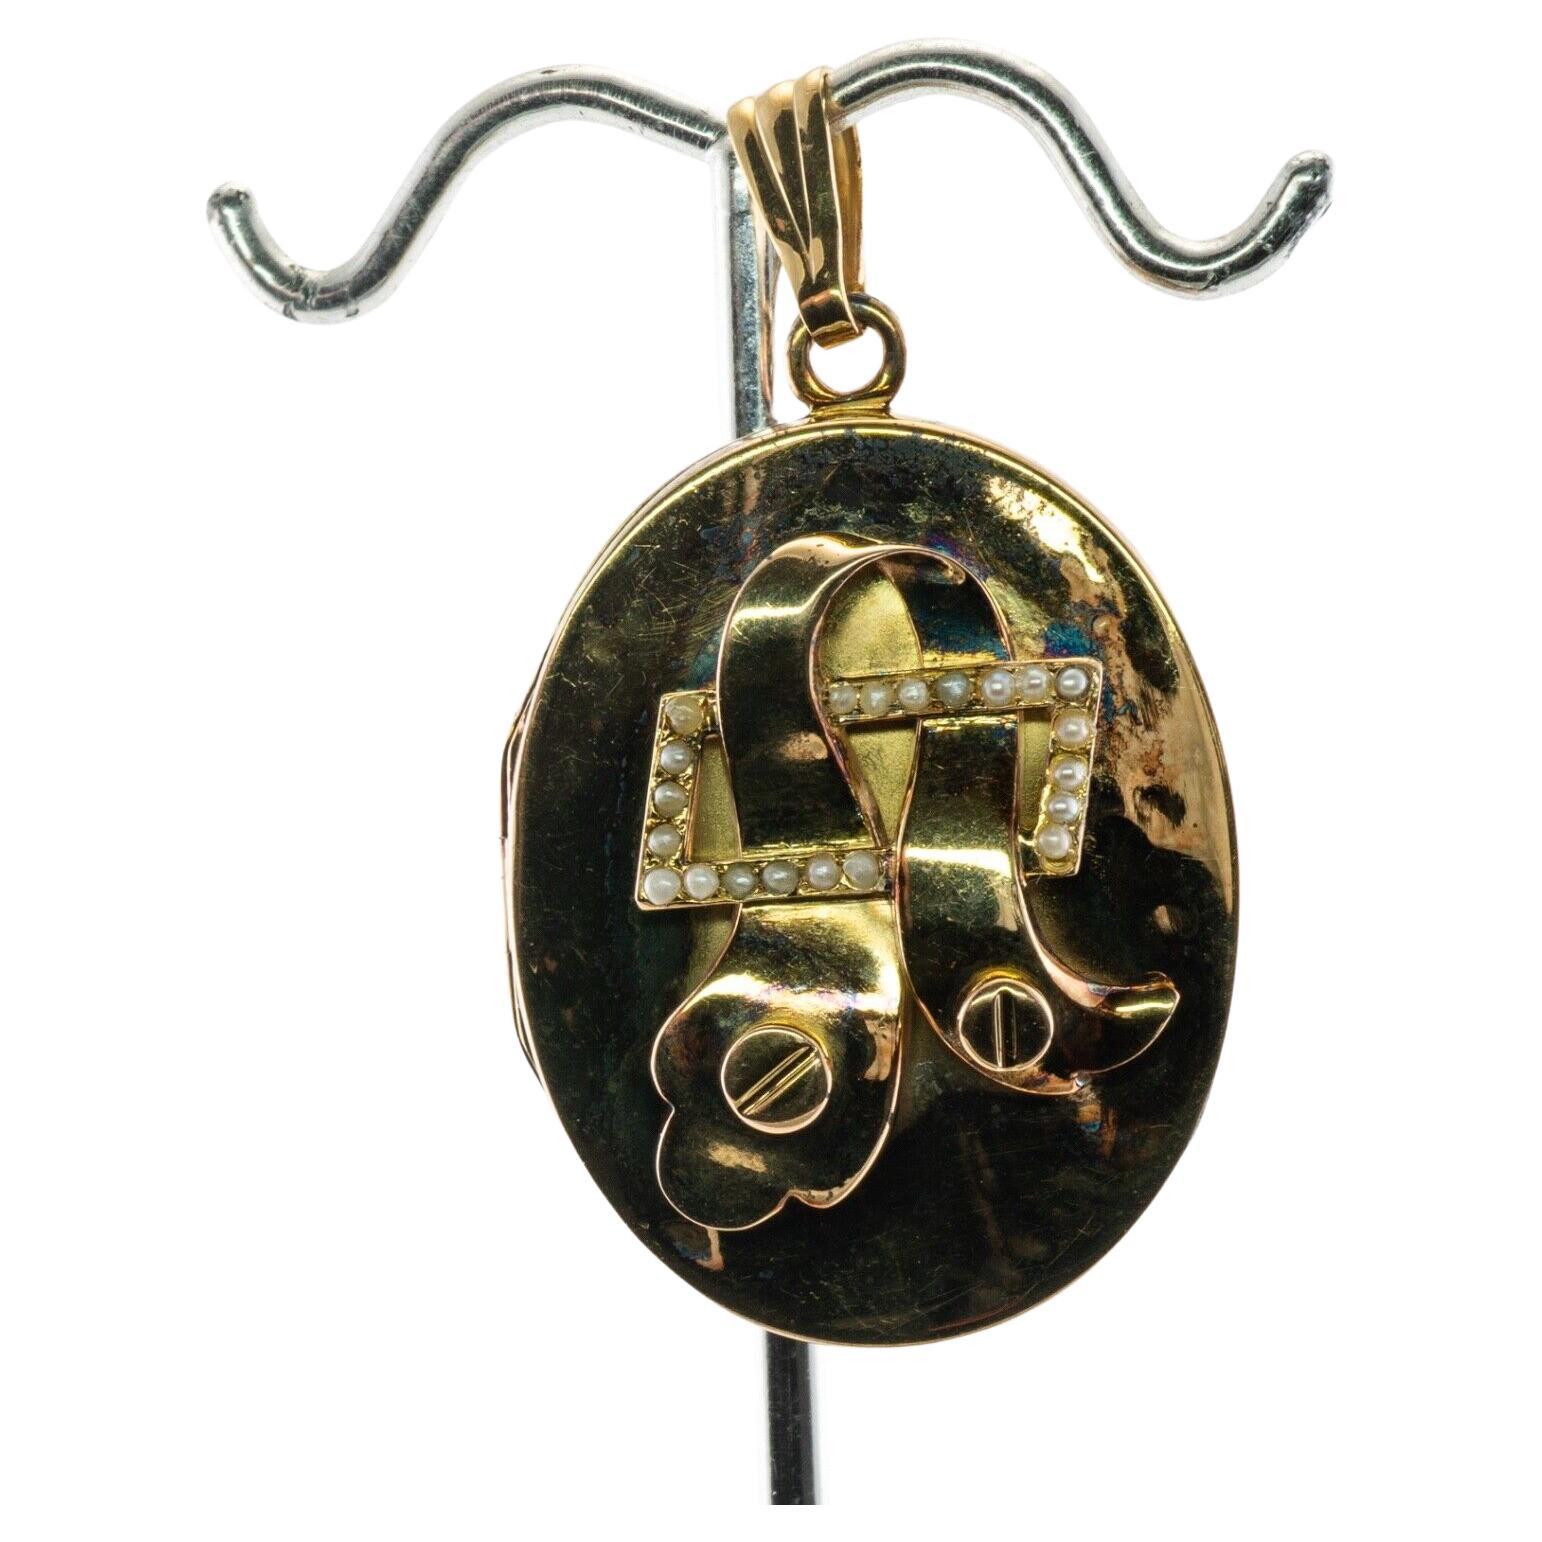 When was the first locket made?